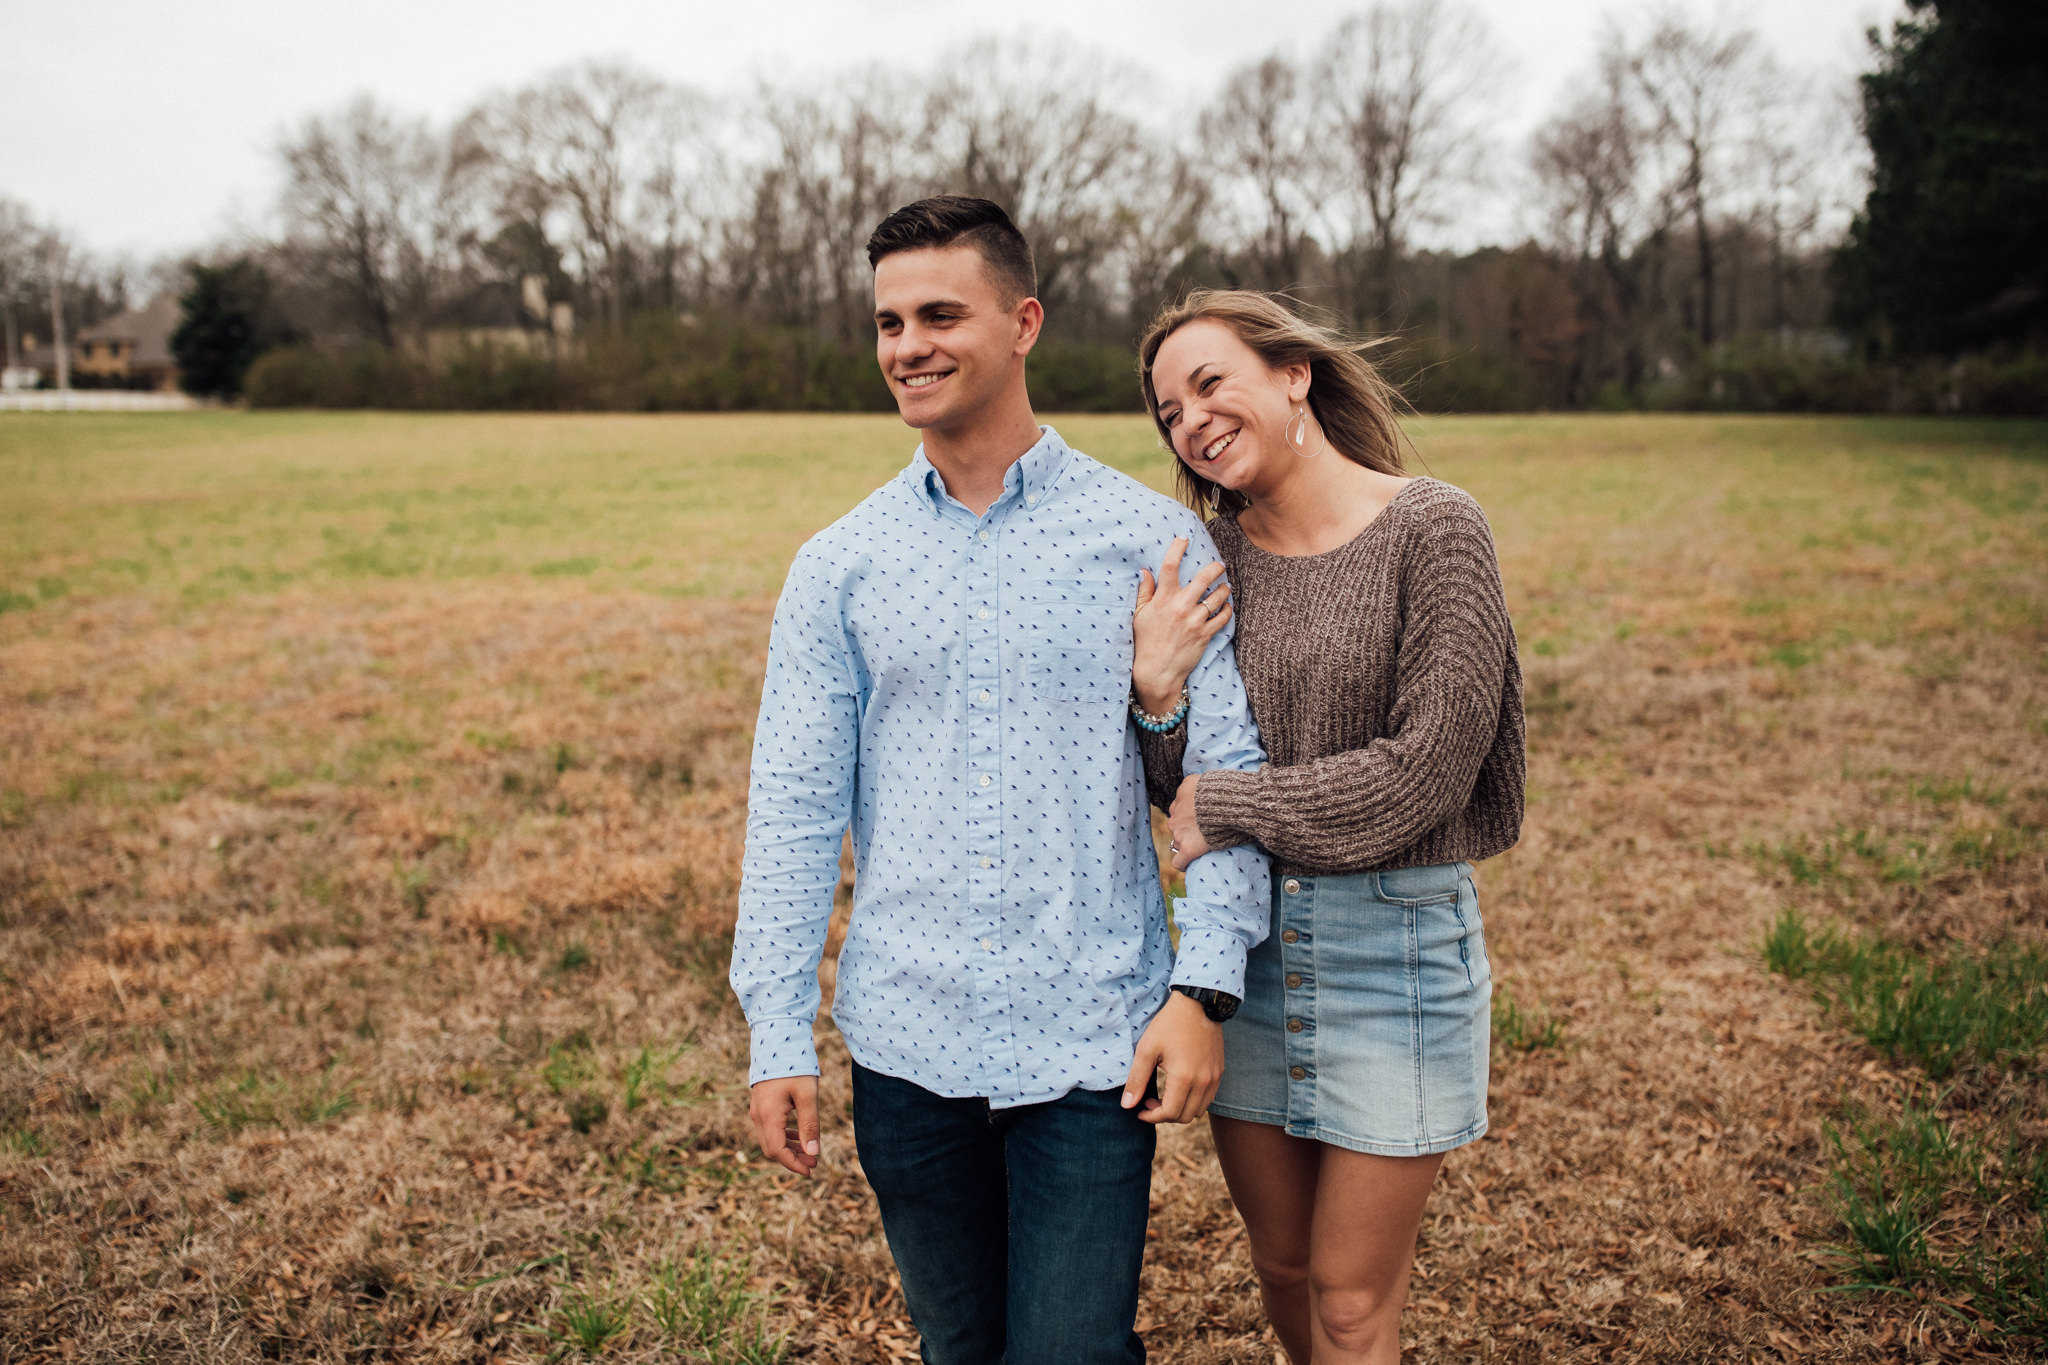 memphis-engagement-photographer-thewarmtharoundyou-greenhouse-engagement-pictures (67 of 118).jpg